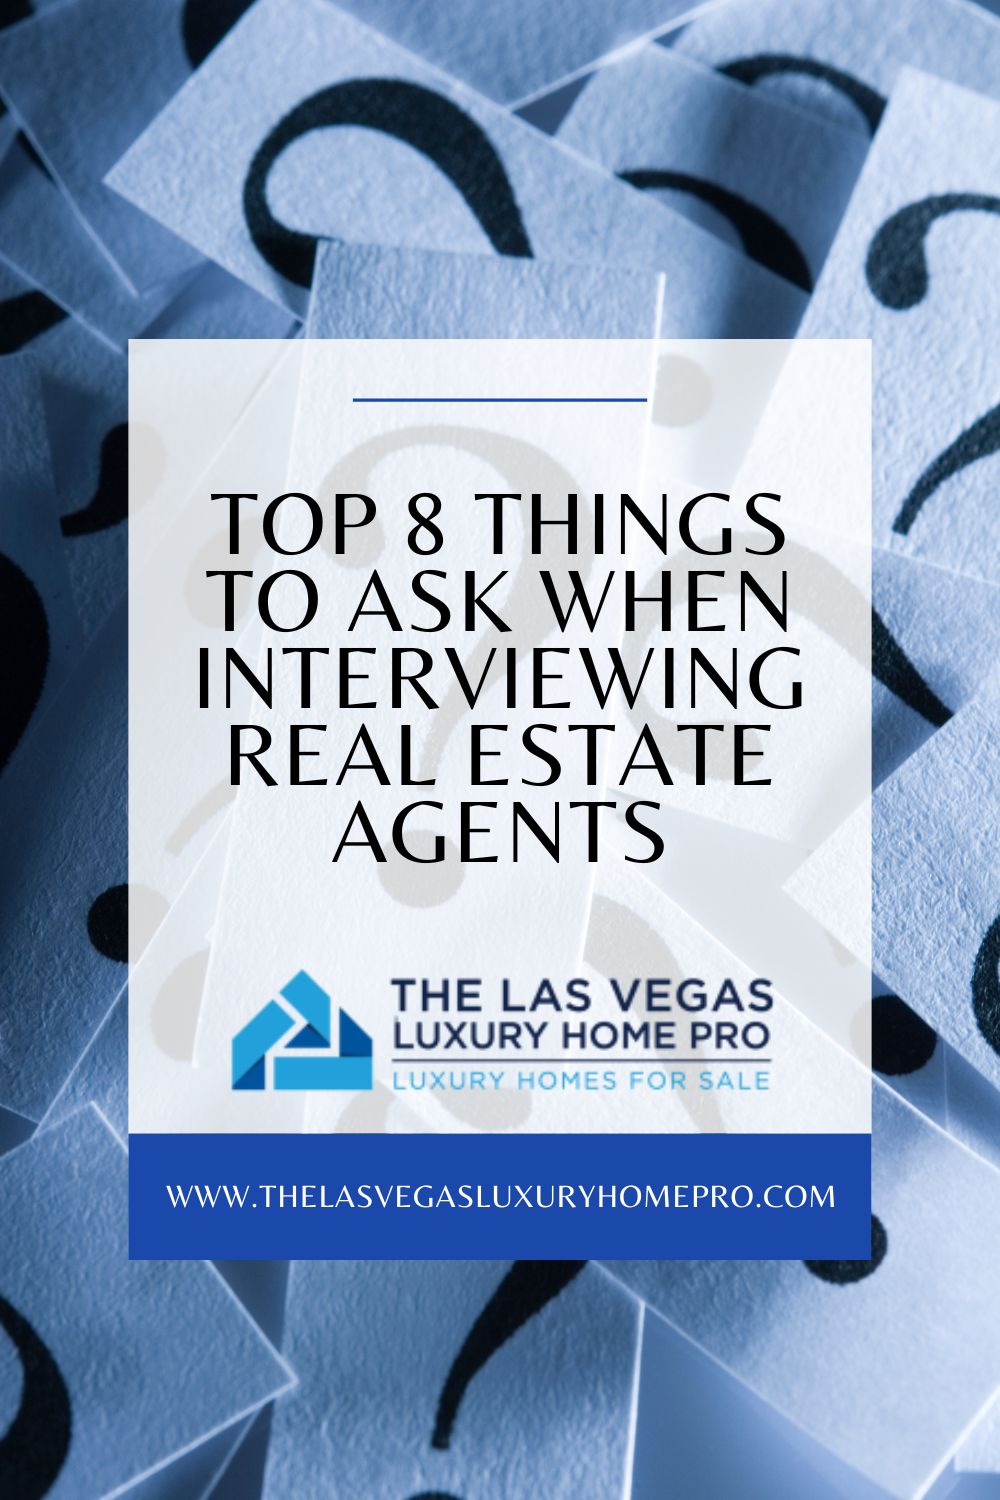 Top 8 Things To Ask When You Interview Real Estate Agents